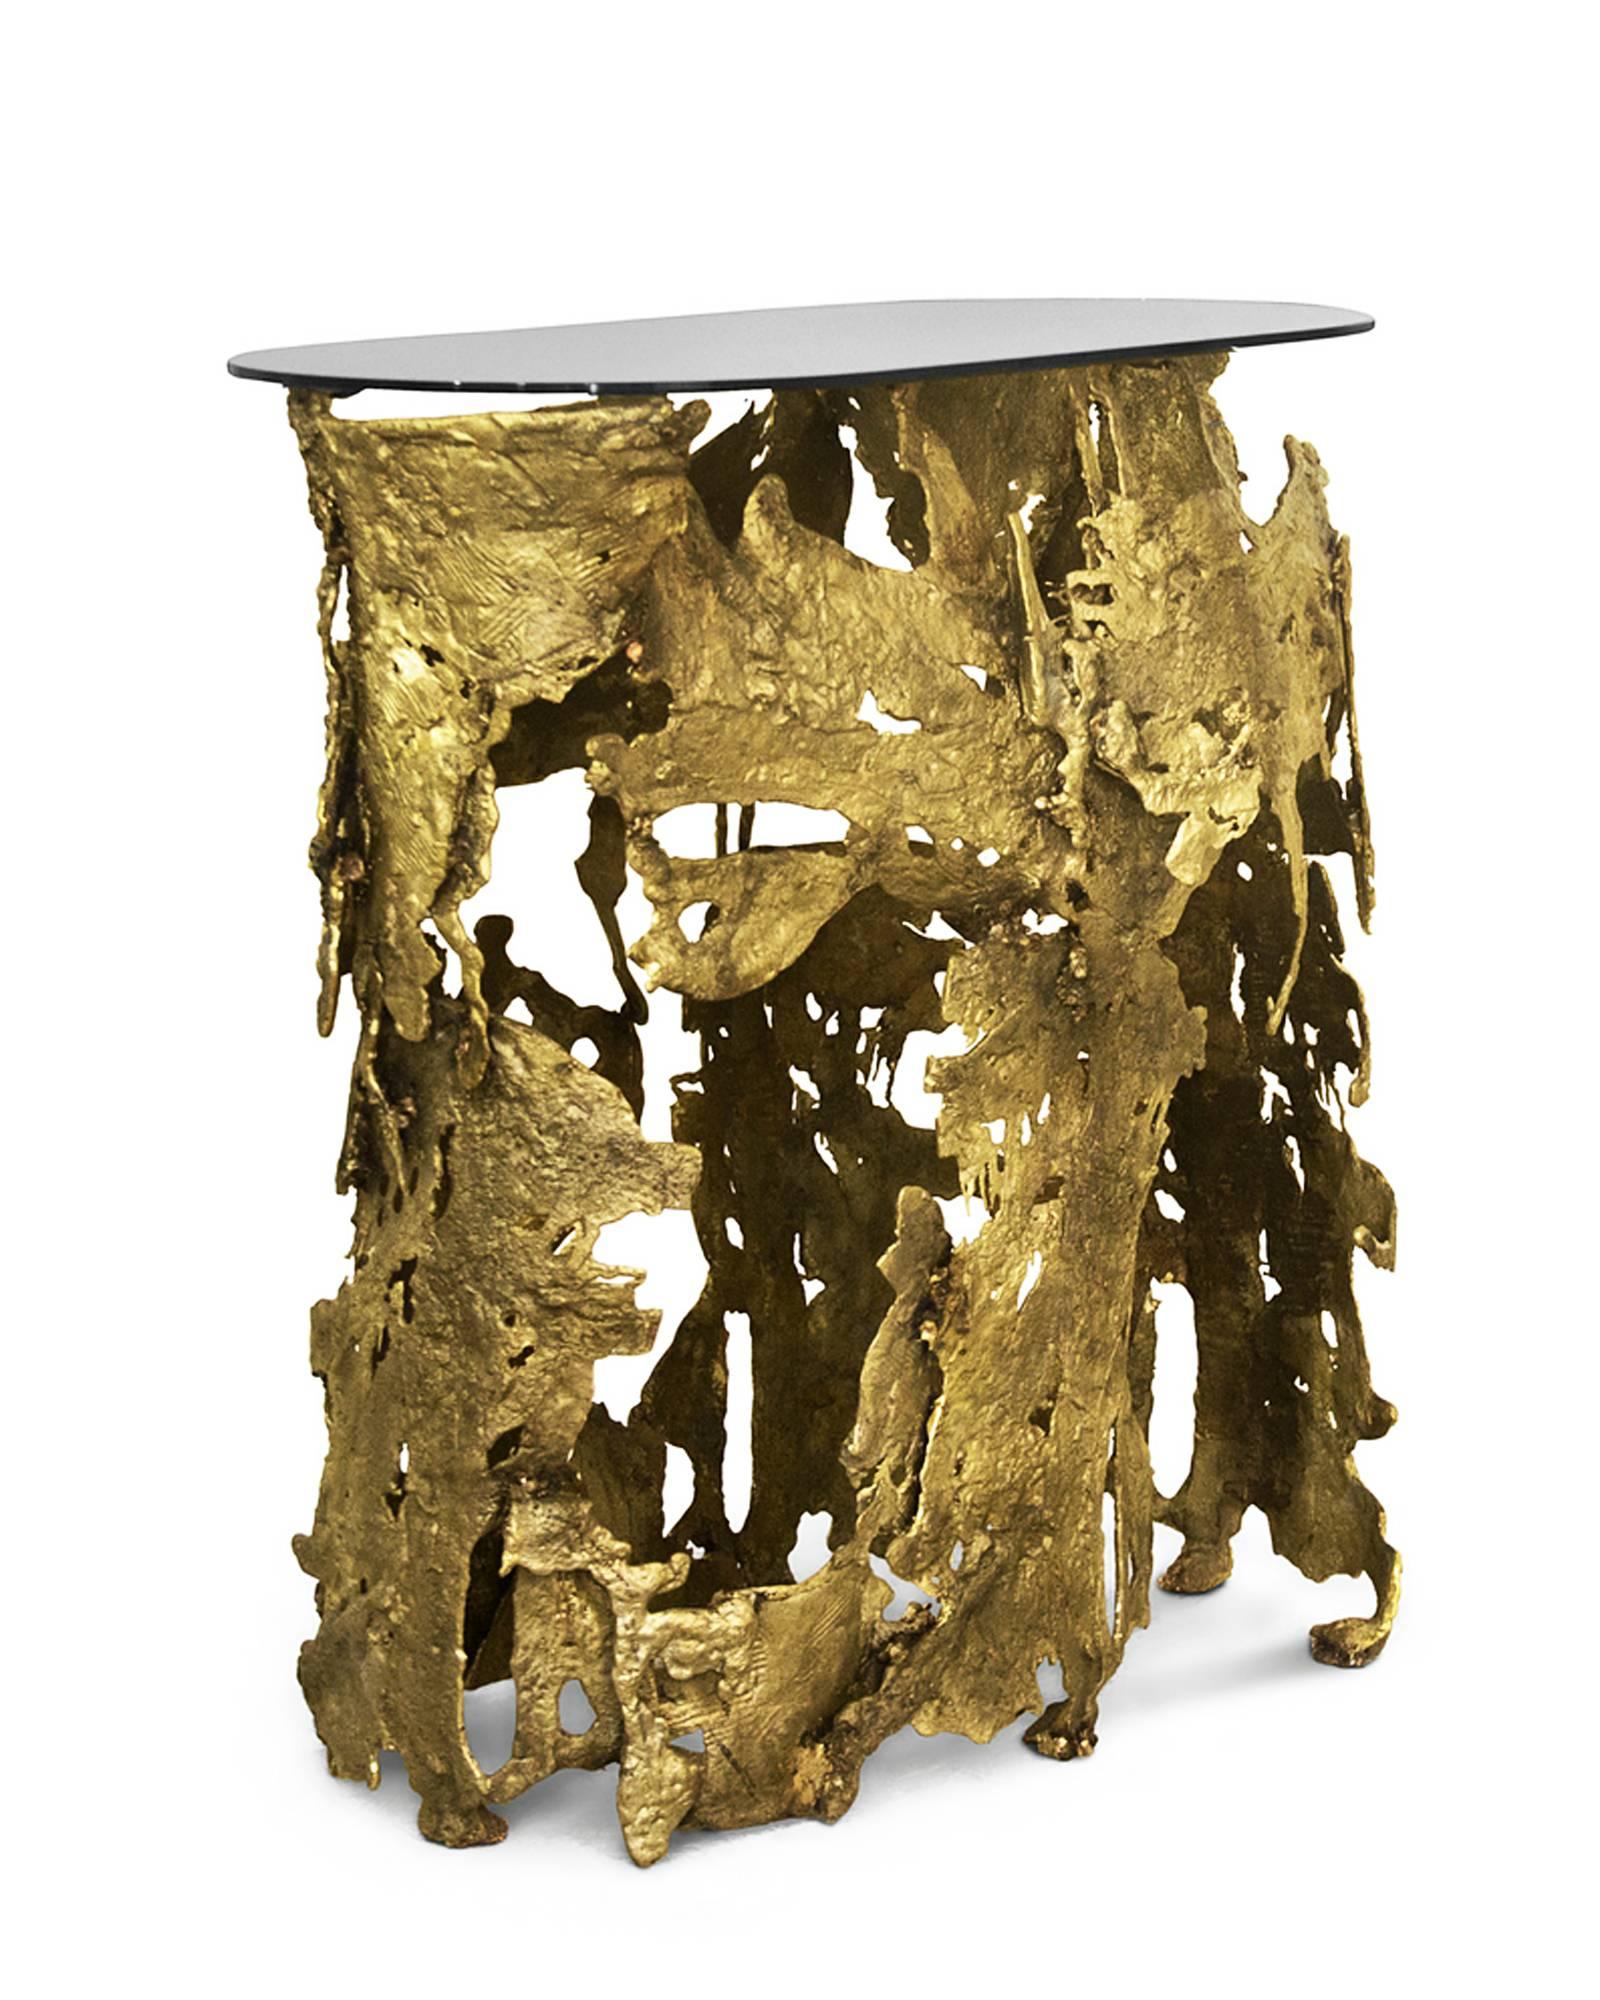 Lava console table made with
Casted brass base.
With oval tabletop in glass bronze finish.